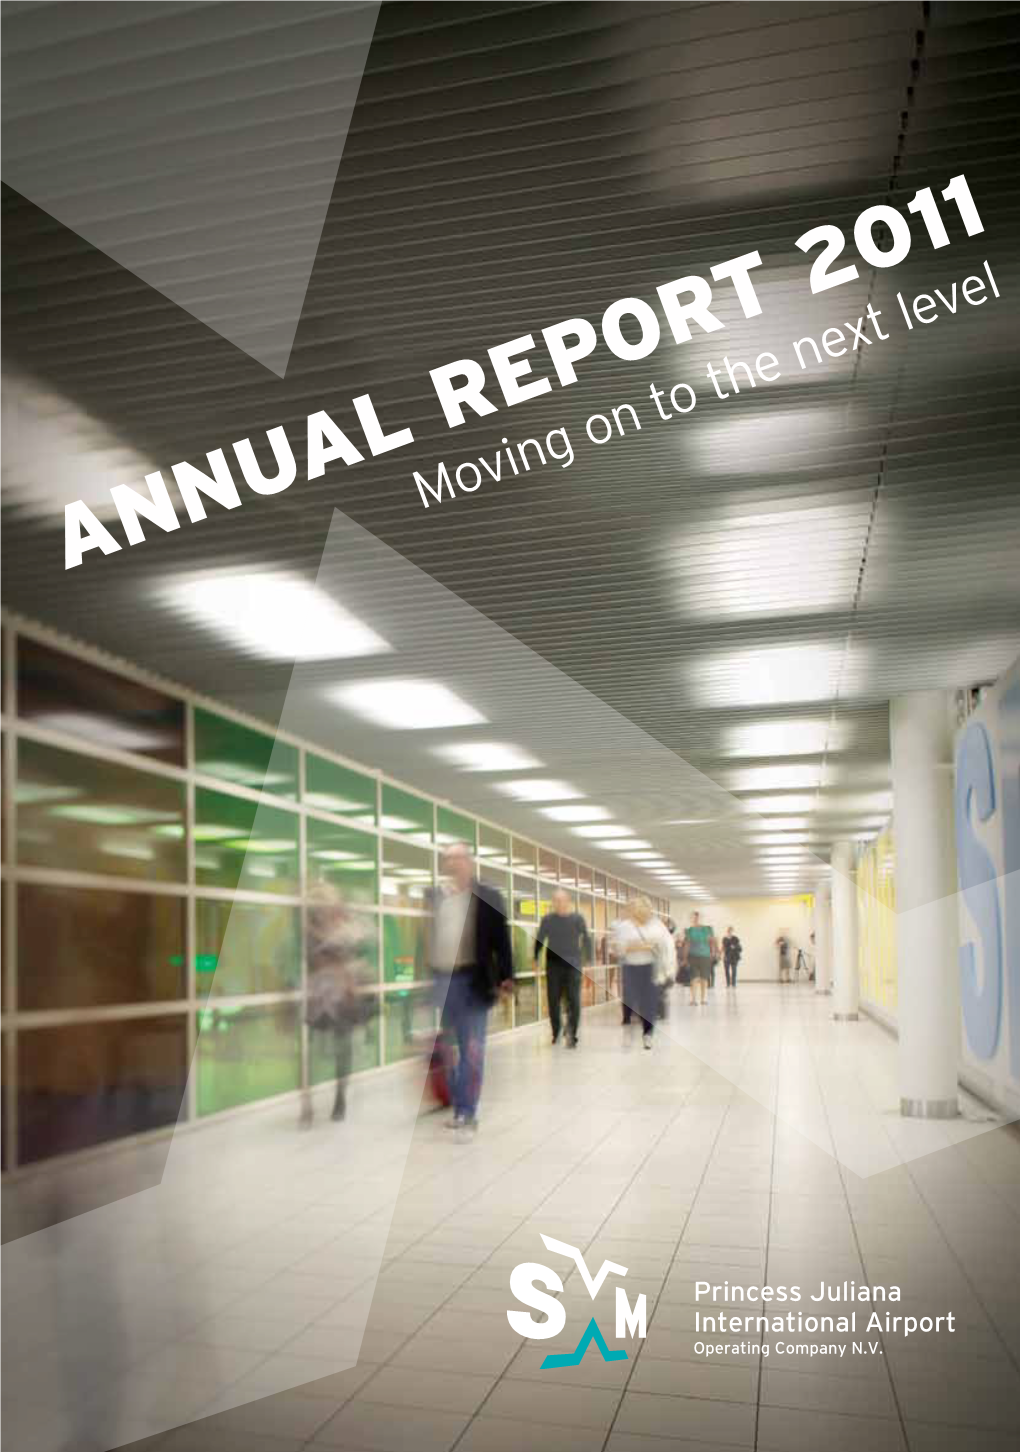 Annual Report 2011 1 Our Vision PJIAE, a Regional Leader in the Provision of Airport Services, Offering a World of Experience to All Its Customers